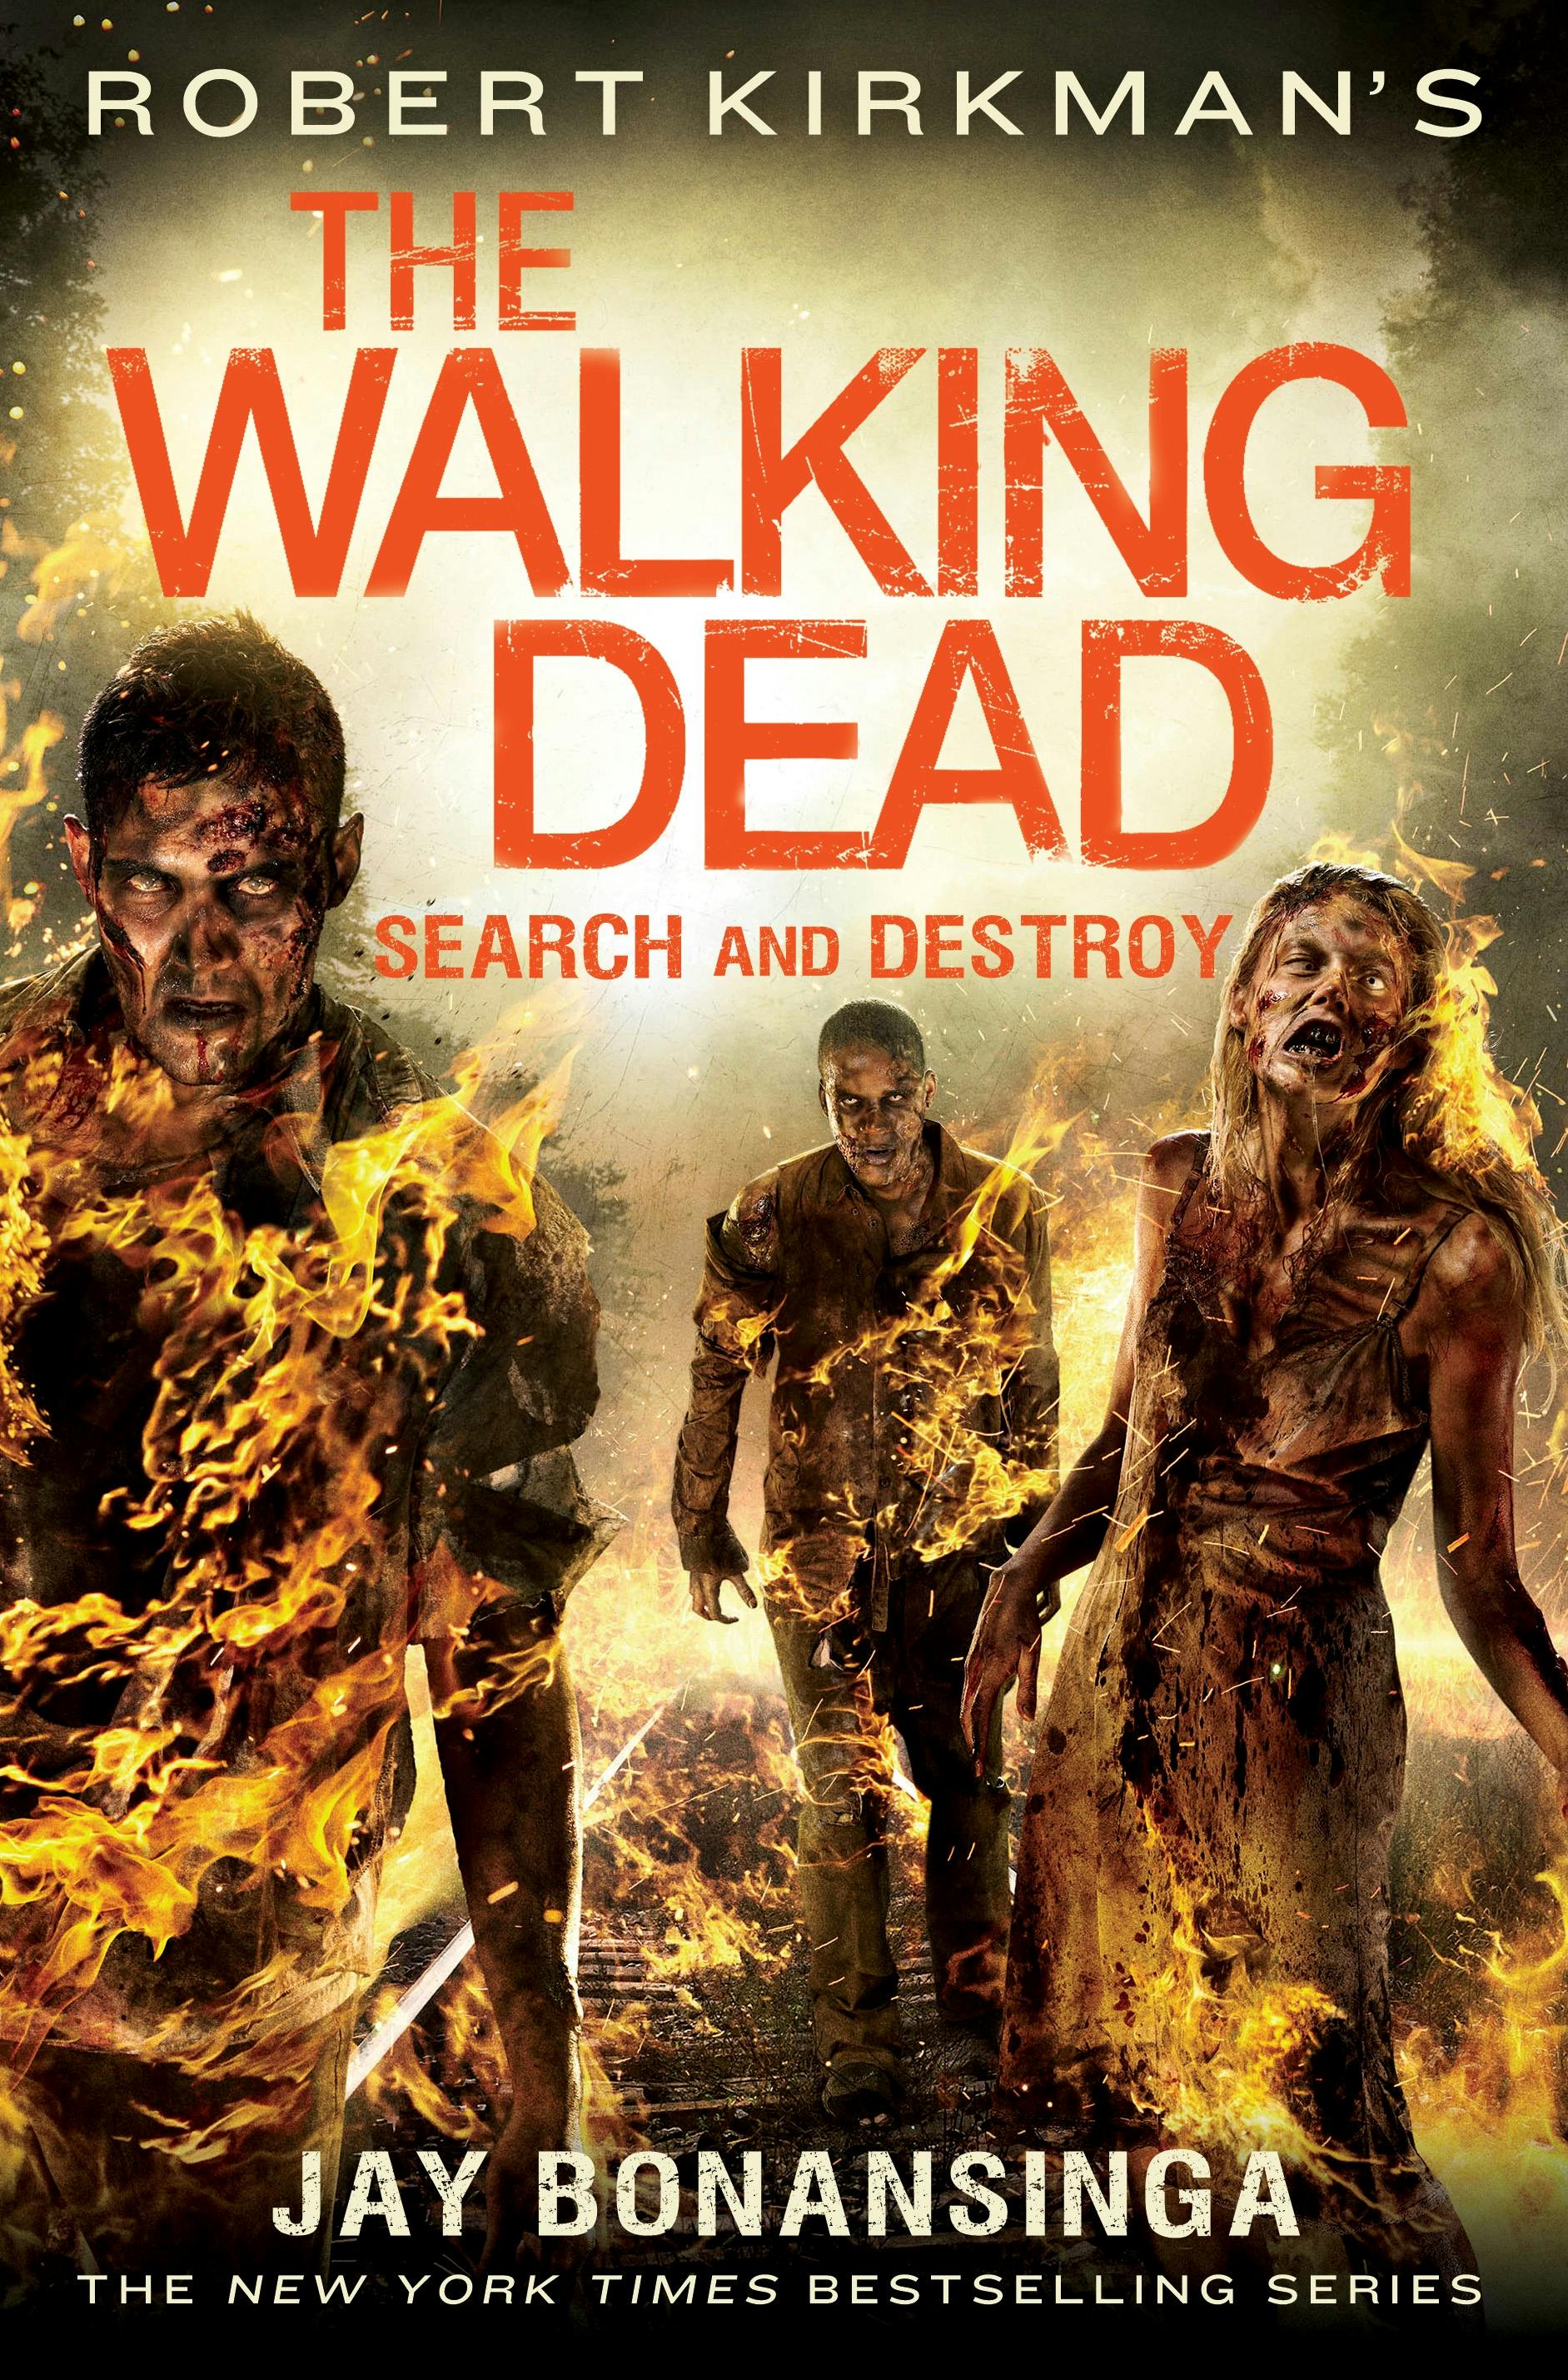 Image of Robert Kirkman's The Walking Dead: Search and Destroy